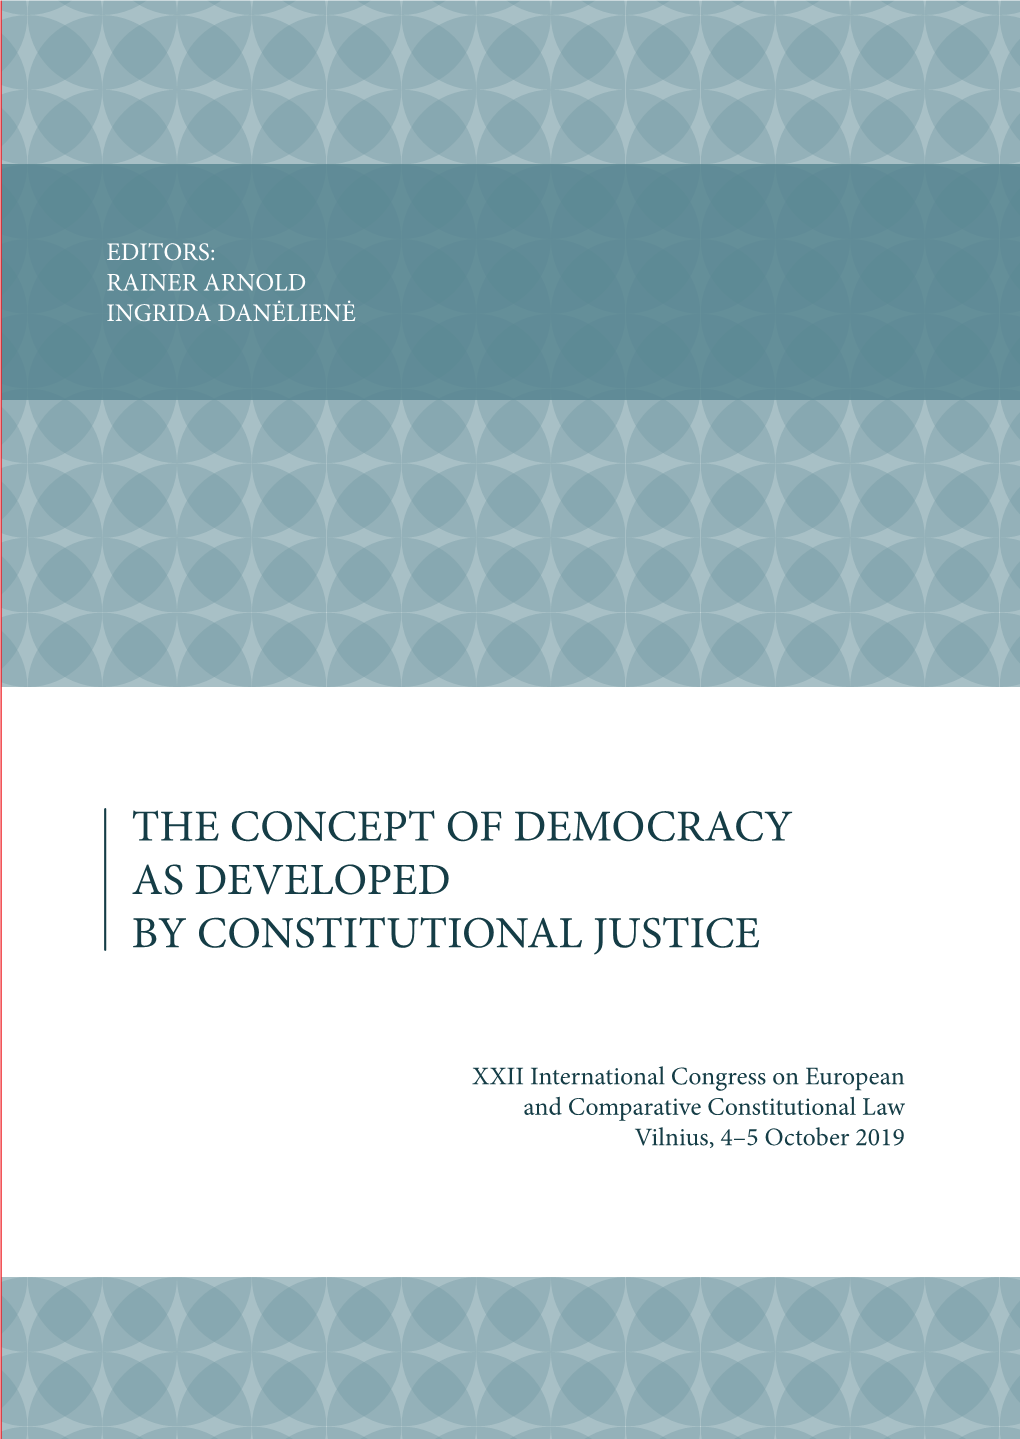 The Concept of Democracy As Developed by Constitutional Justice